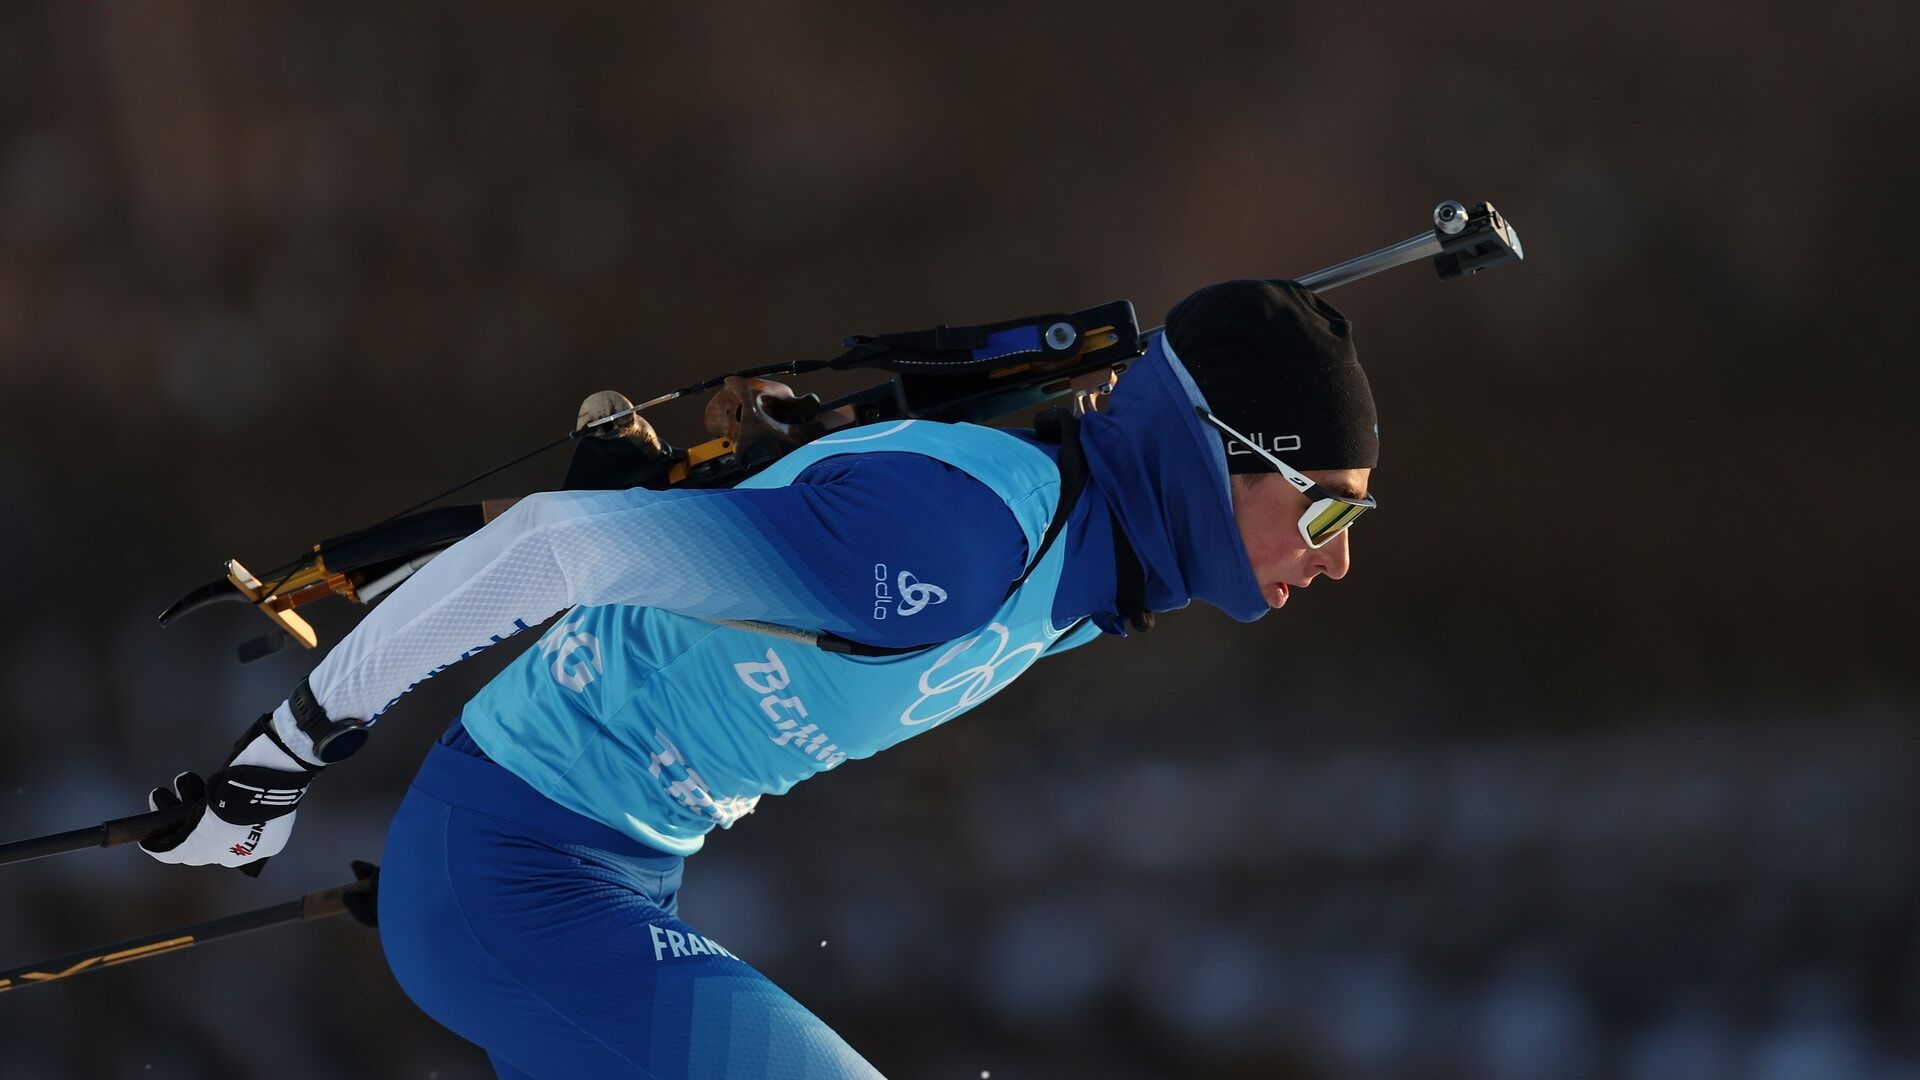 Who to watch in the biathlon mixed 4x6km relay Olympics wrex